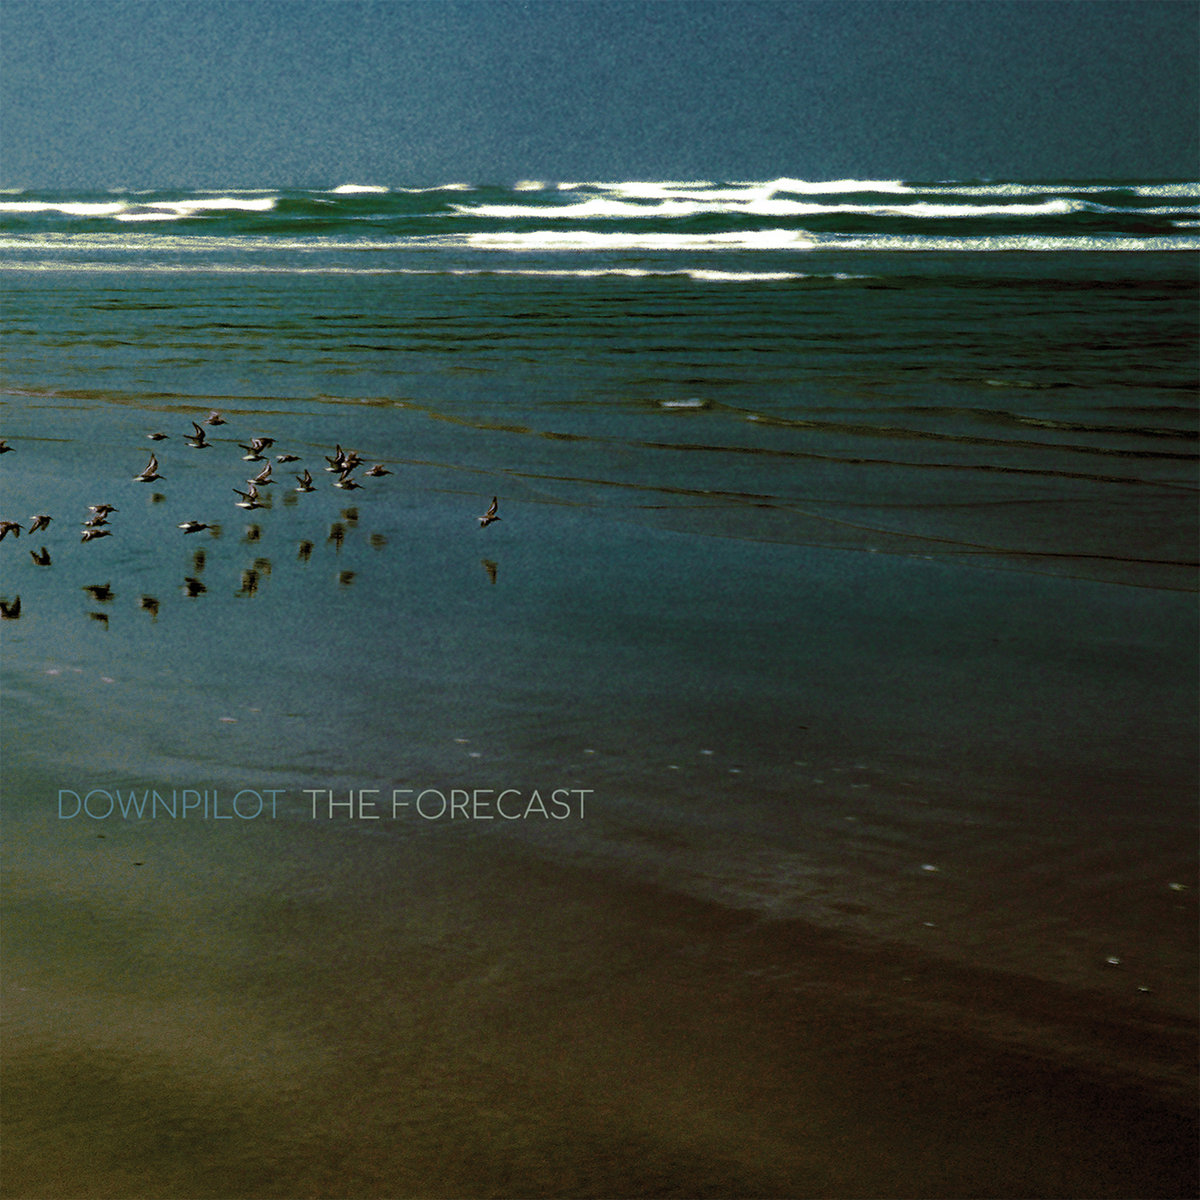 Listening to a Craftsman at the Peak of His Craft – “The Forecast” from Seattle’s Downpilot